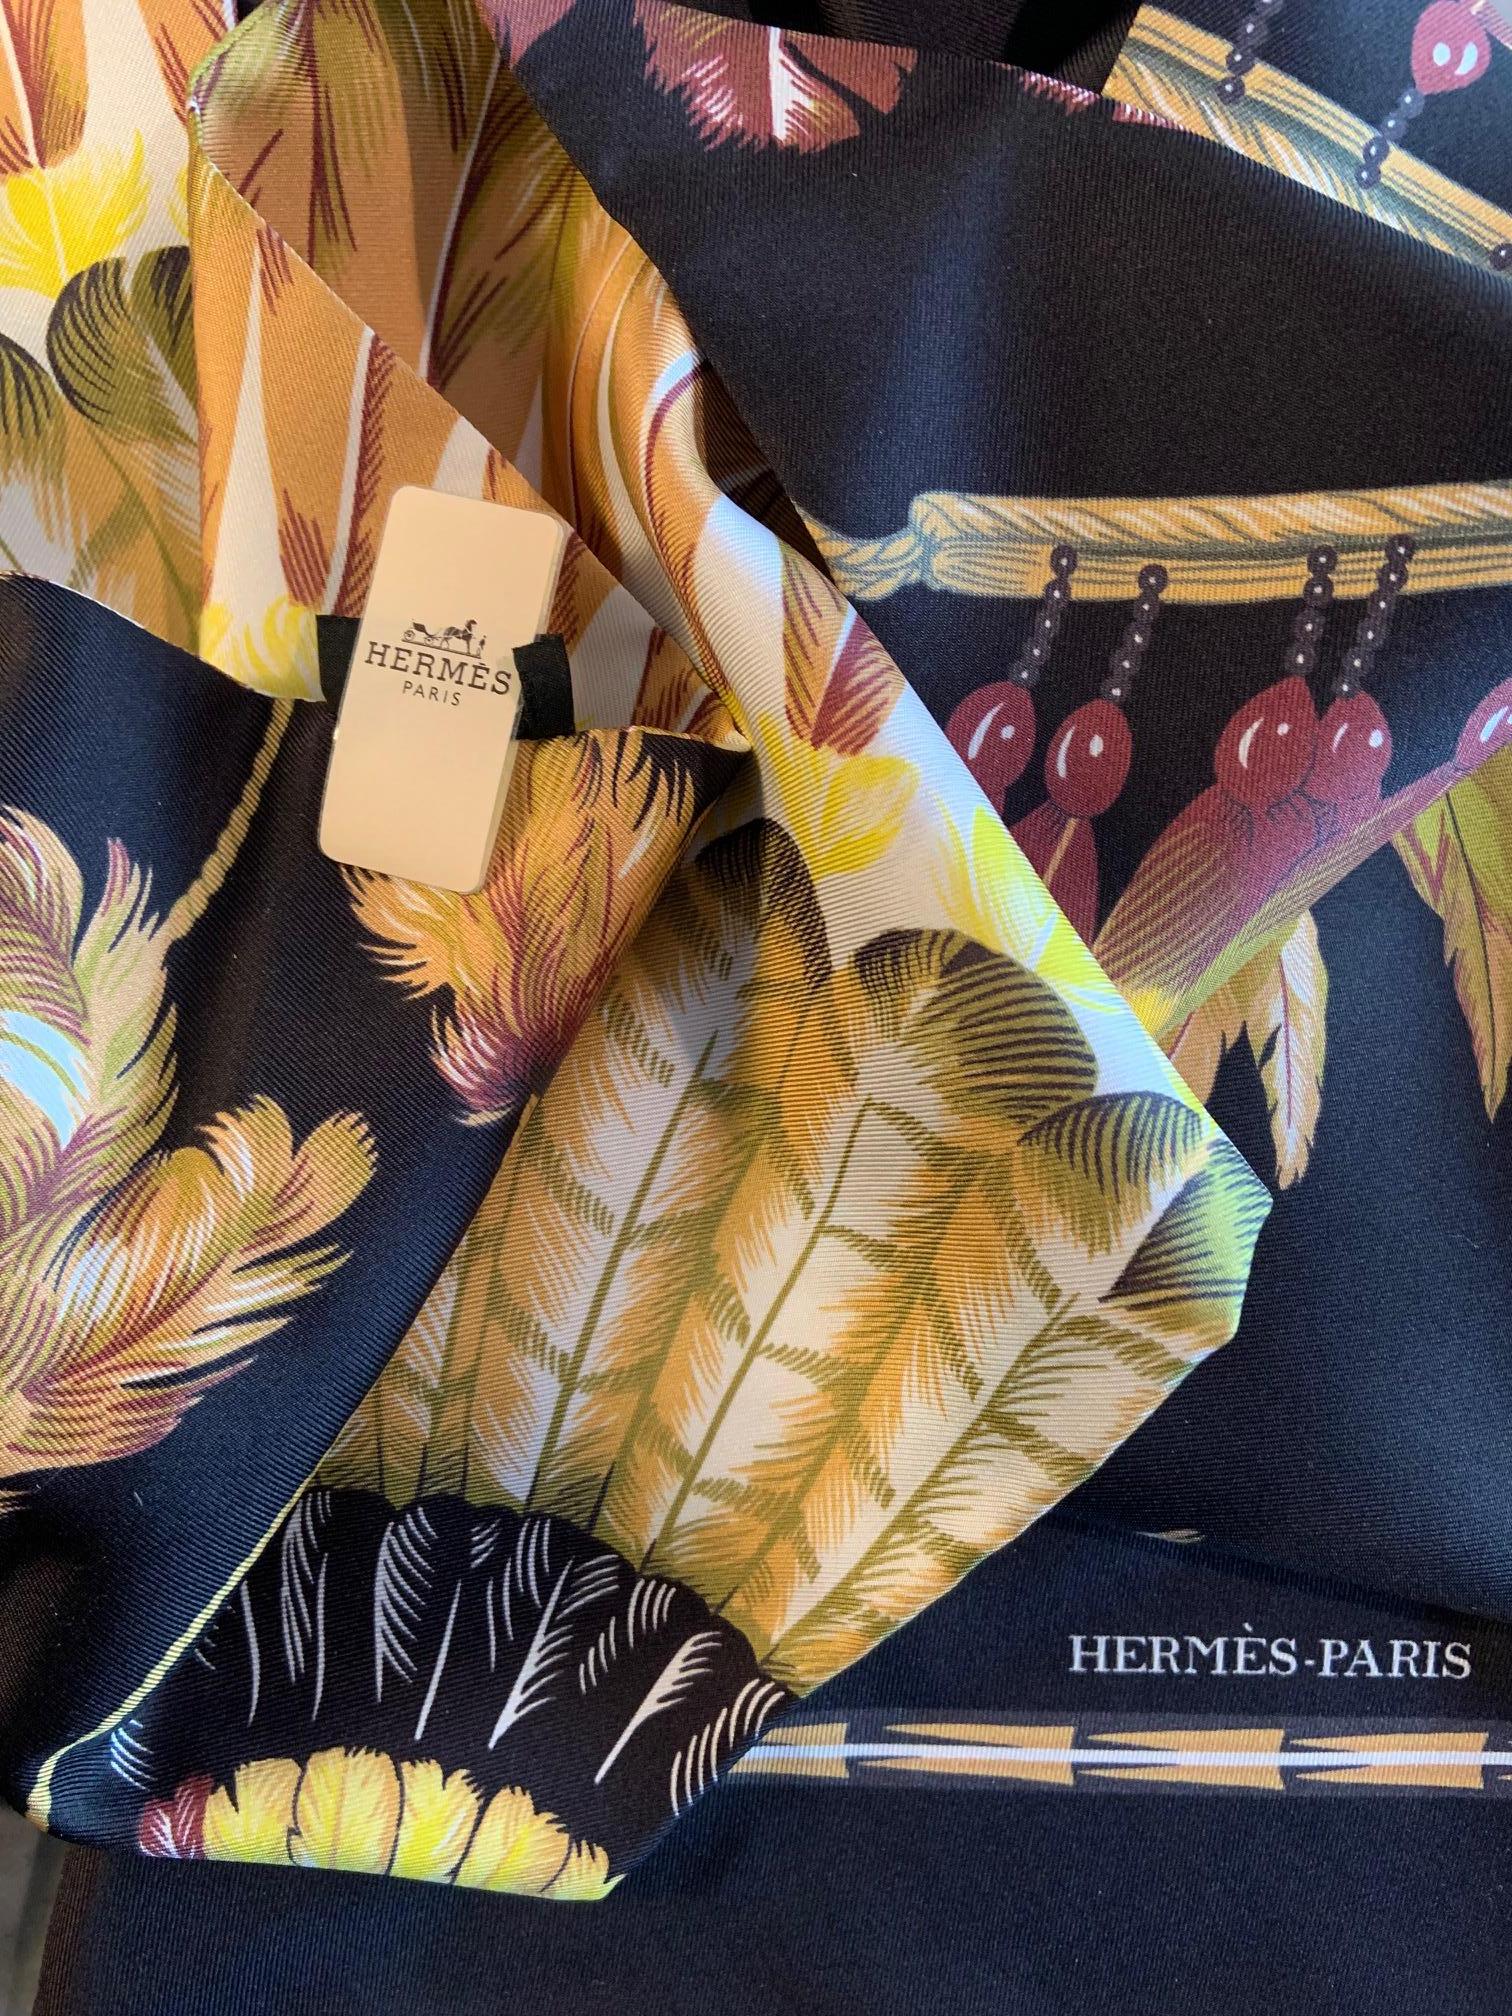 This Hermes Maxi Twilly scarf is in the Brazil pattern with a black background and many shades of yellow, brown, grey, green and white. It comes to you with the original tag and box and it is in as new, excellent condition.
Measurements;   20cm    X